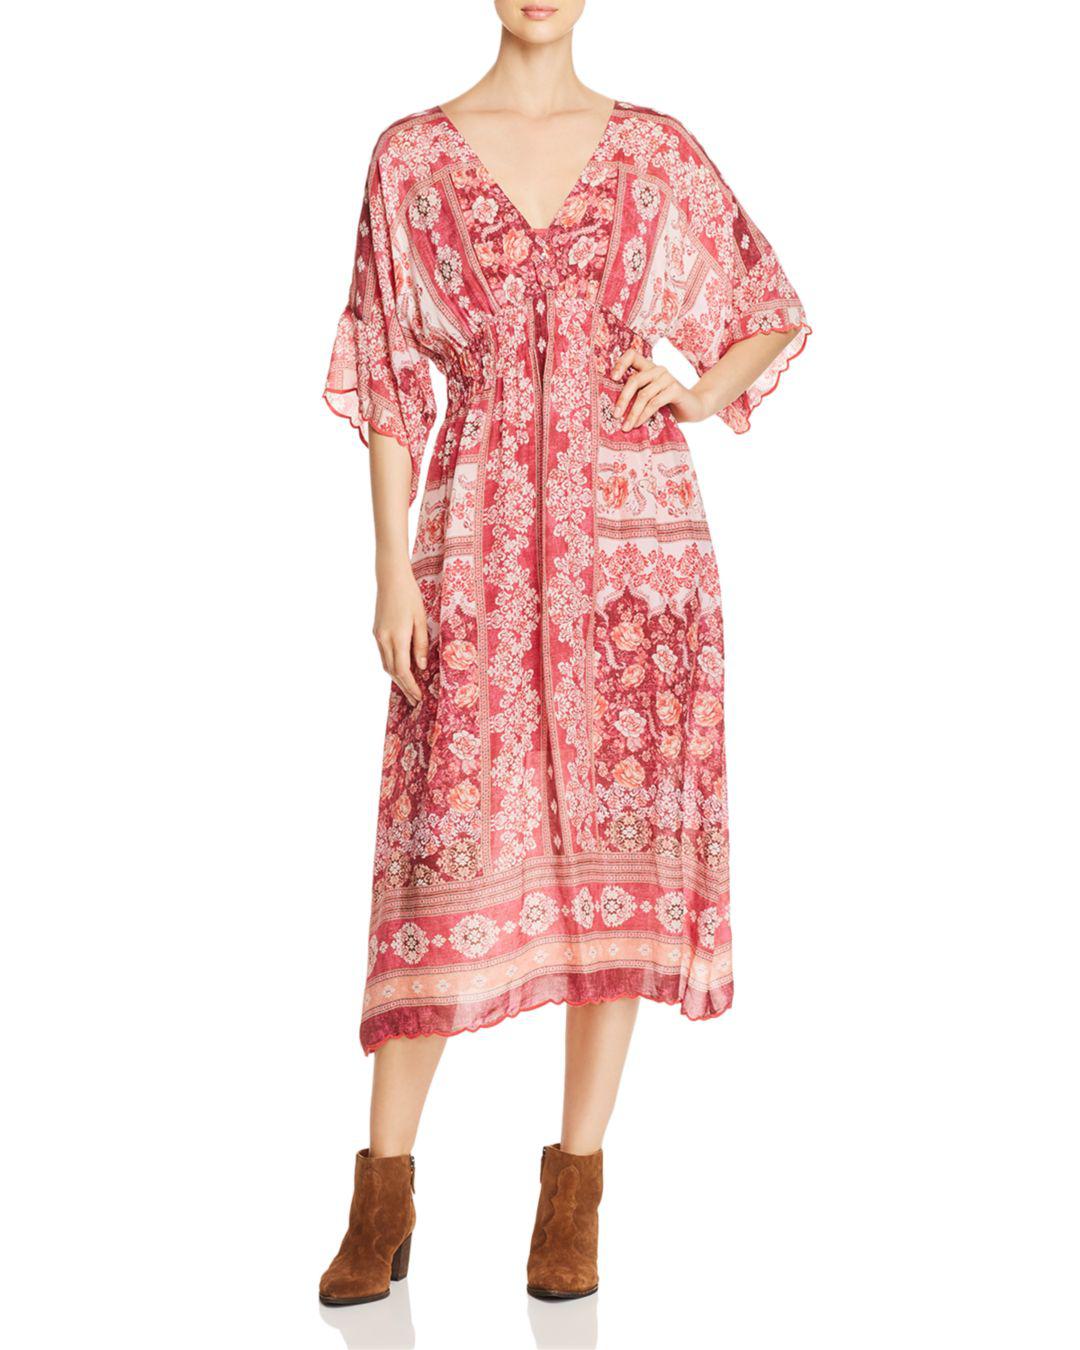 Johnny Was V-neck Patterned Midi Dress in Pink - Lyst